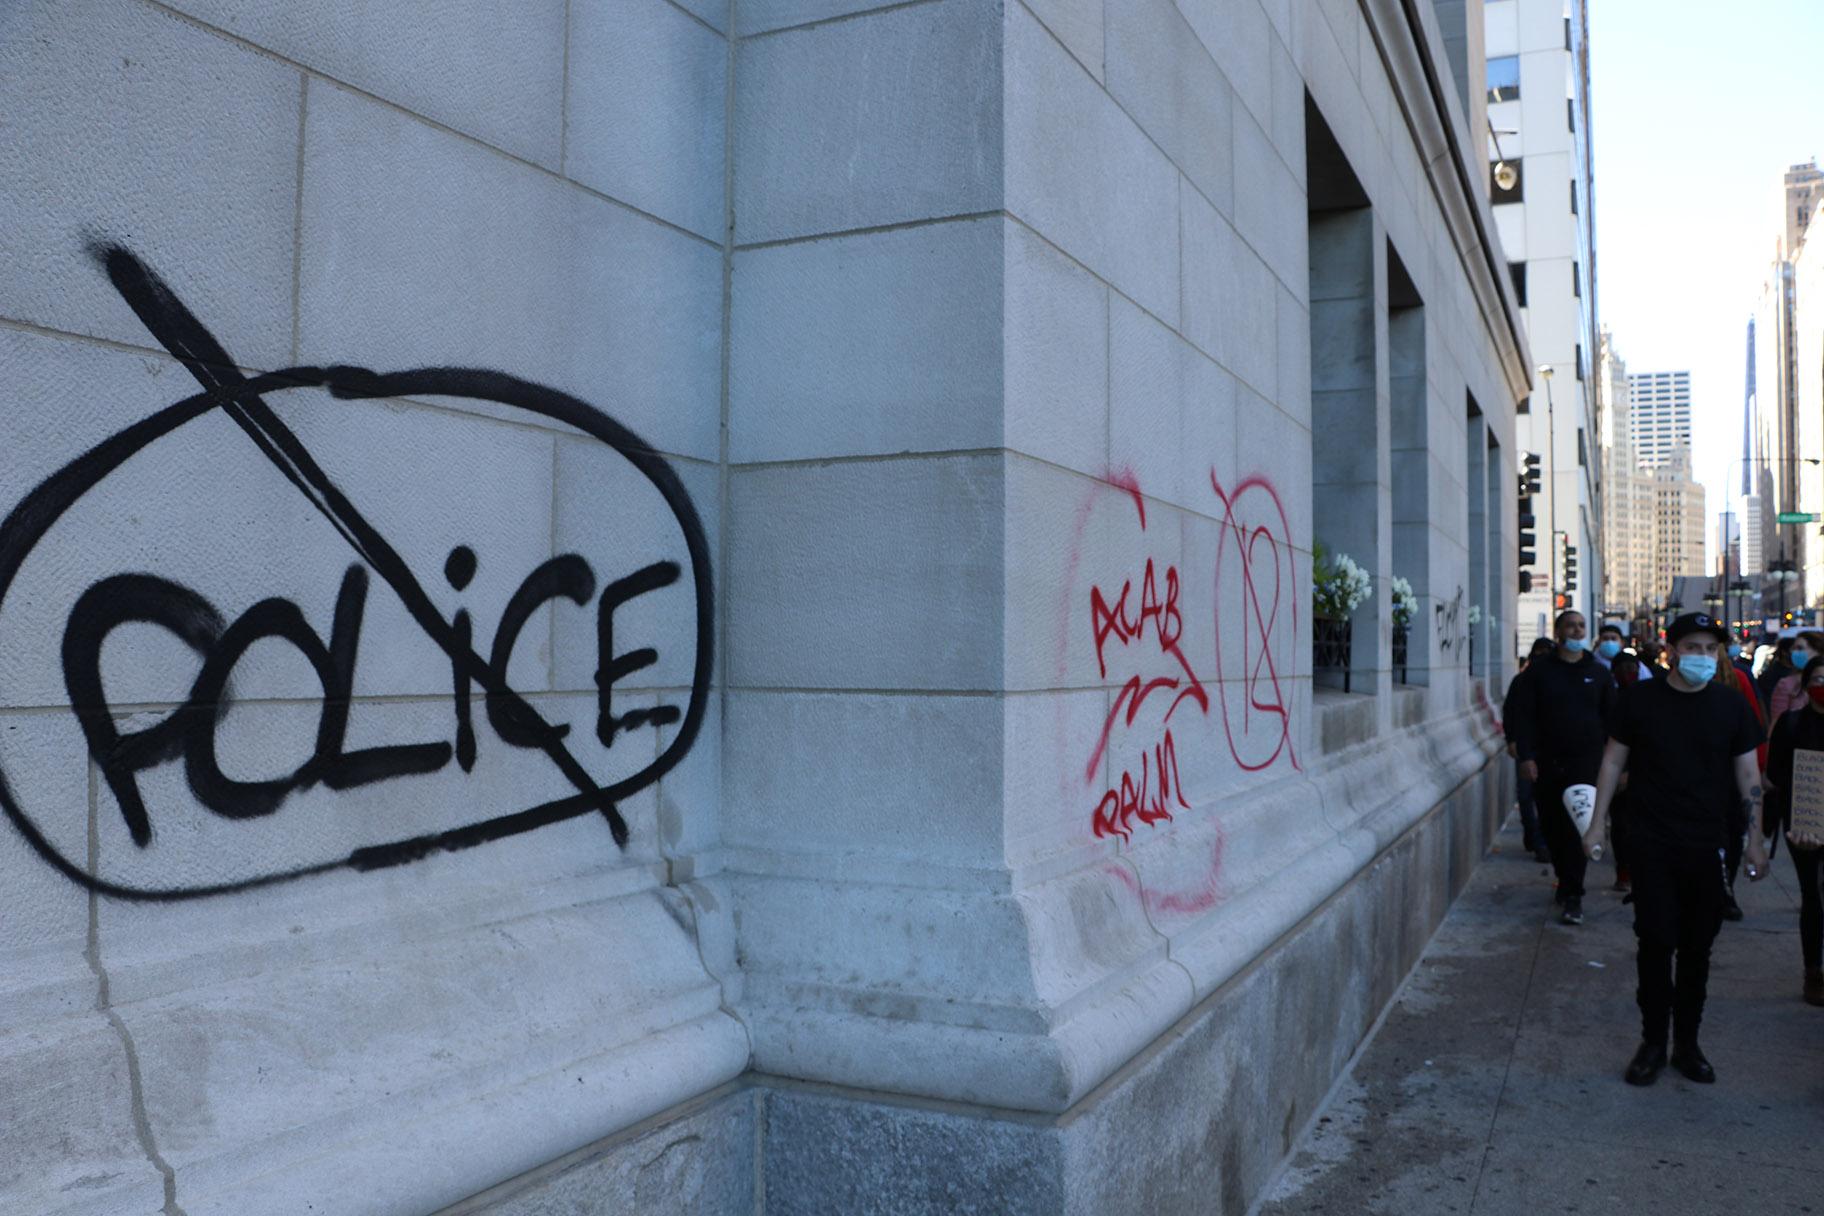 Graffiti was spray-painted throughout the protest route, which covered large parts of the Loop. (Evan Garcia / WTTW News)